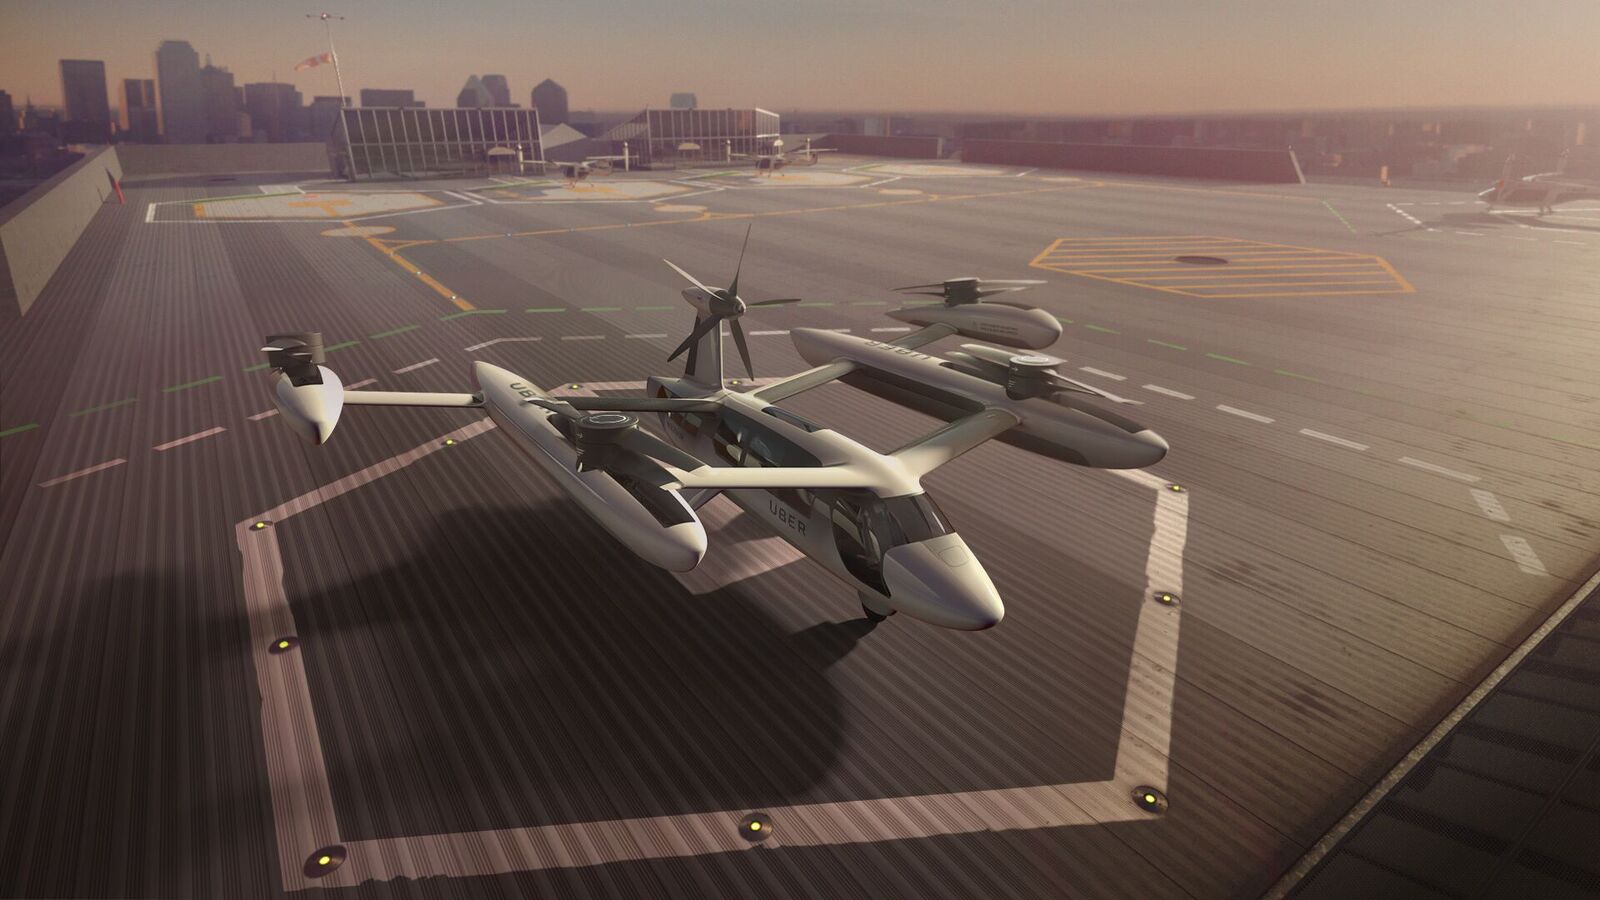 A potential design of a flying taxi from Uber